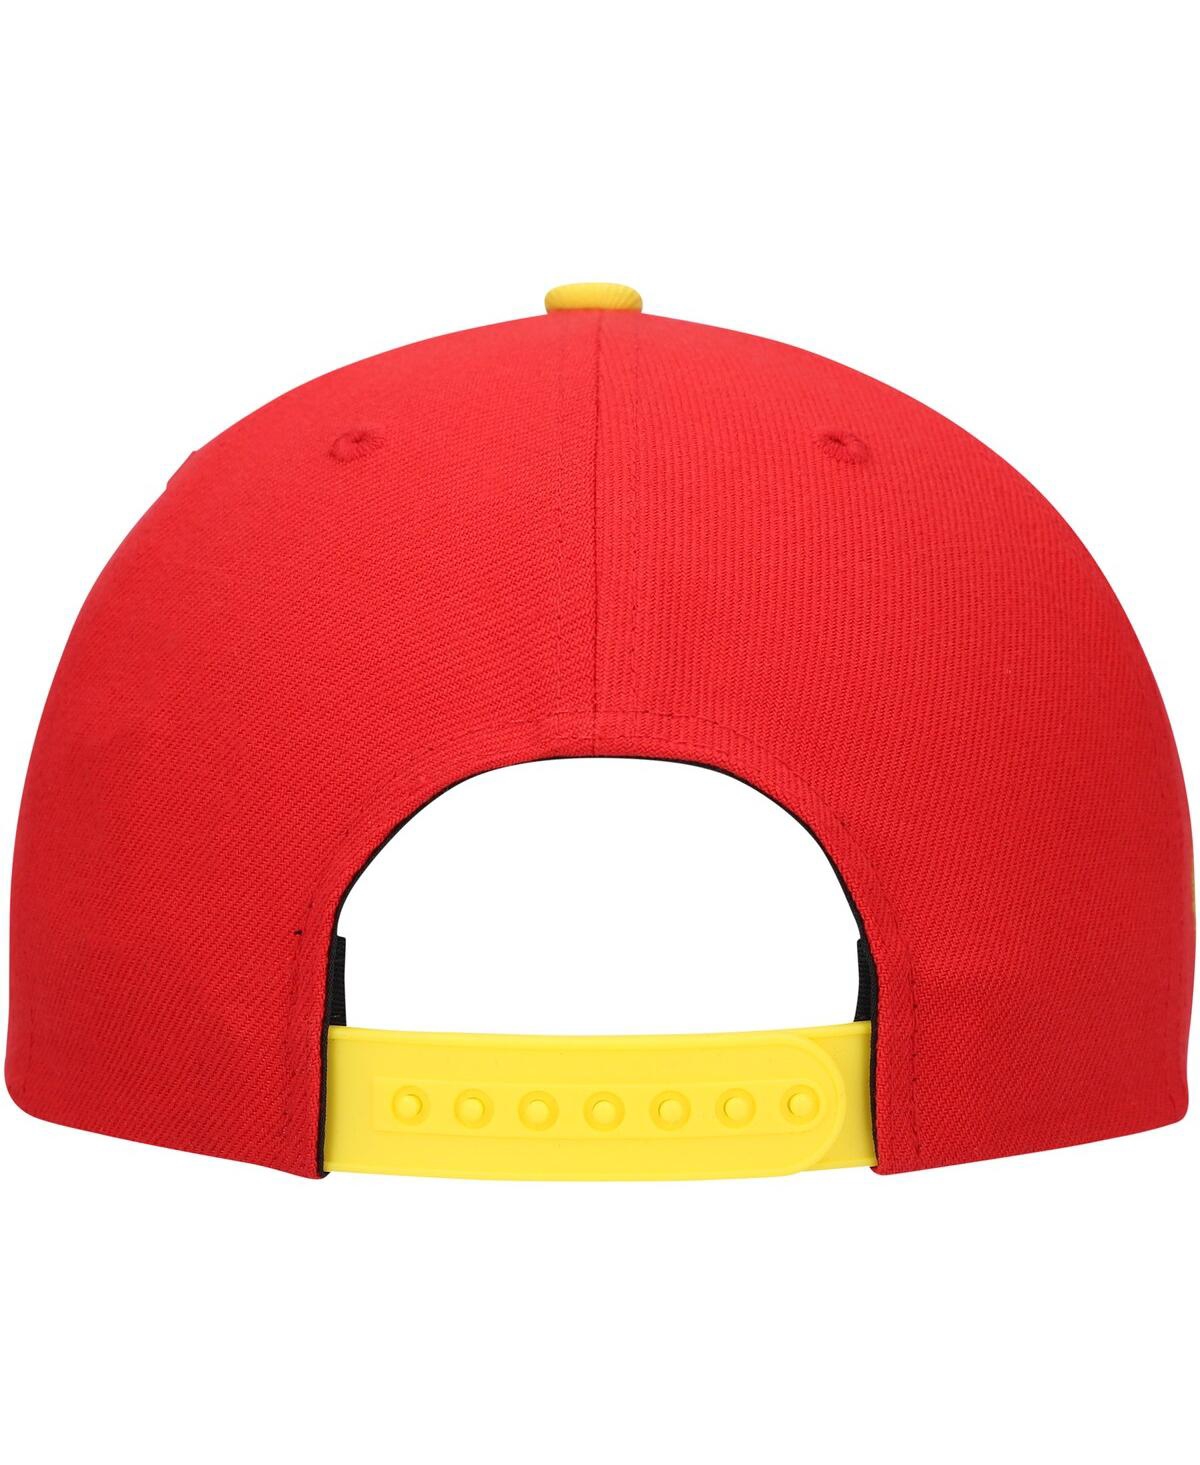 Shop Lids Big Boys And Girls Red Iron Man Character Snapback Hat